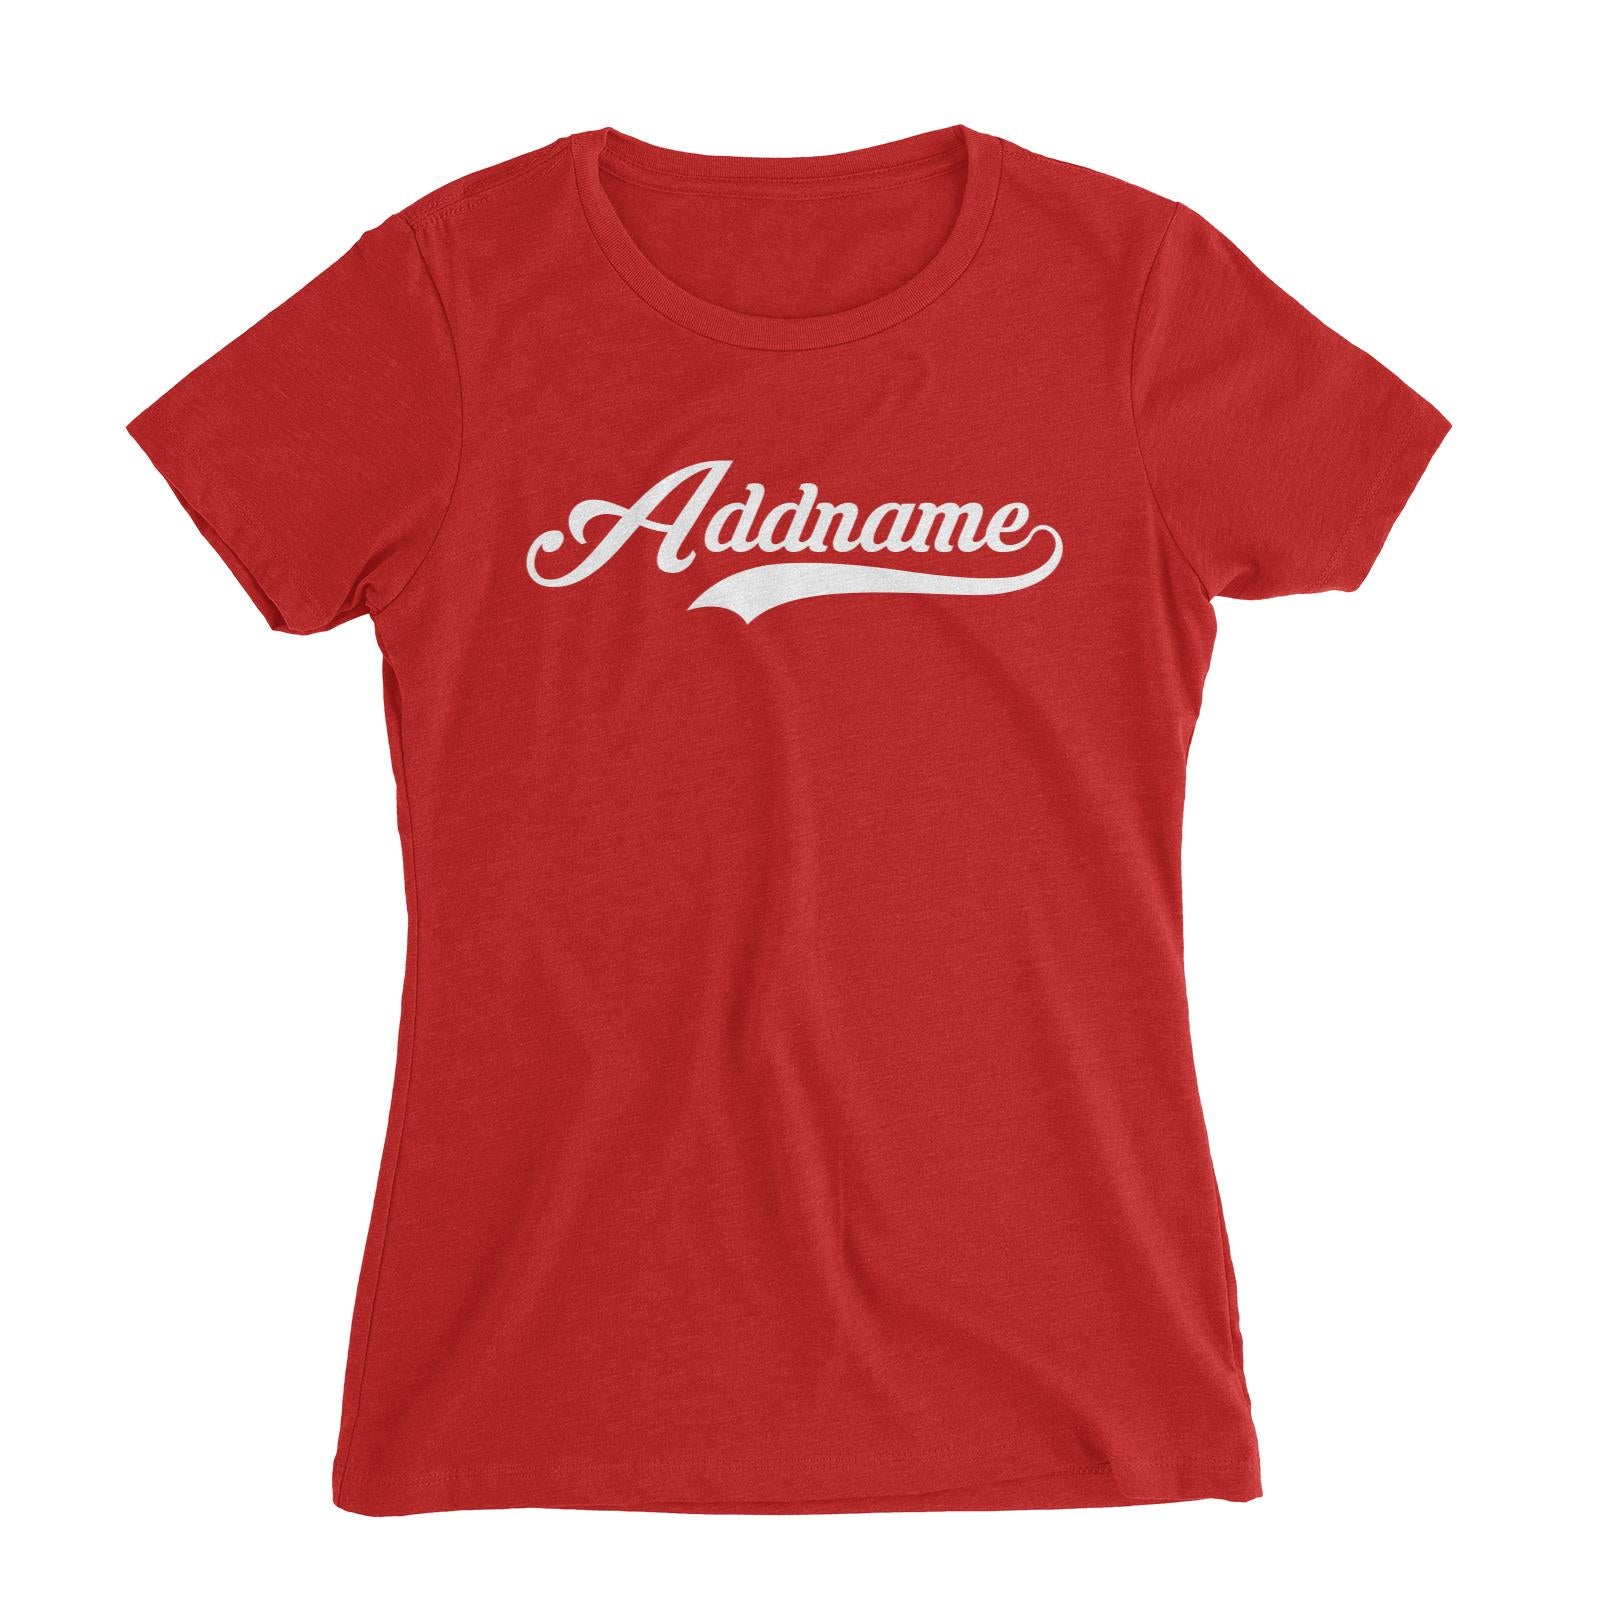 Retro Addname Women's Slim Fit T-Shirt  Matching Family Personalizable Designs